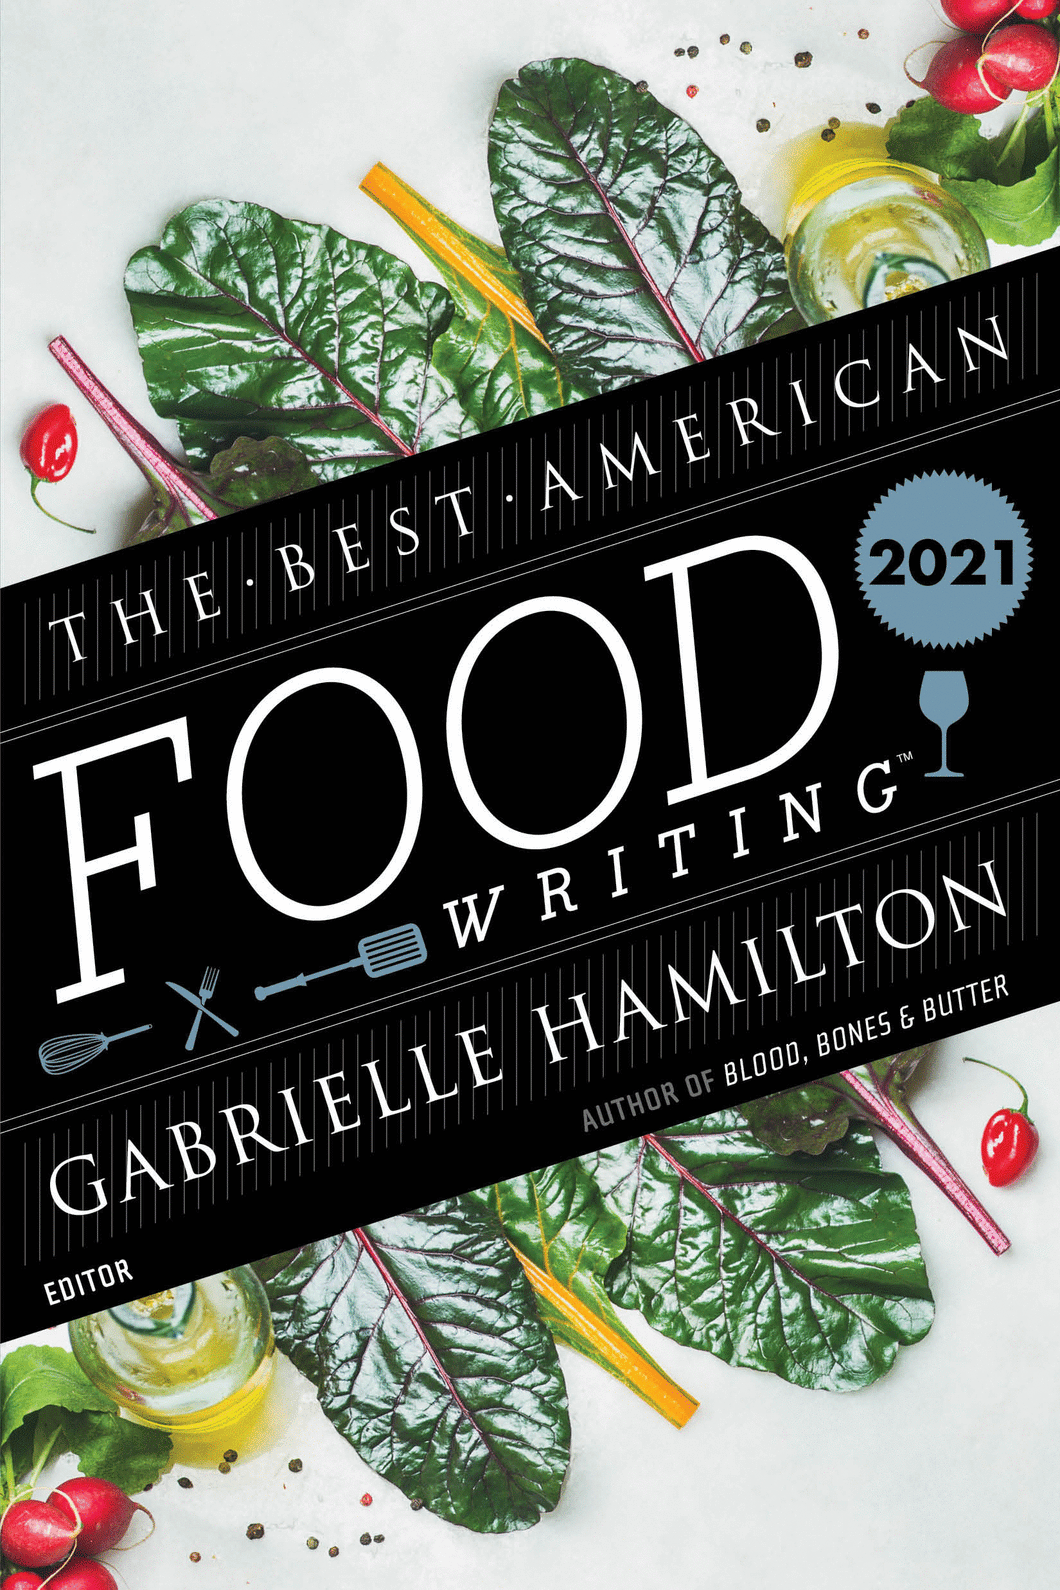 The Best American Food Writing 2021 Edited by Gabrielle Hamilton